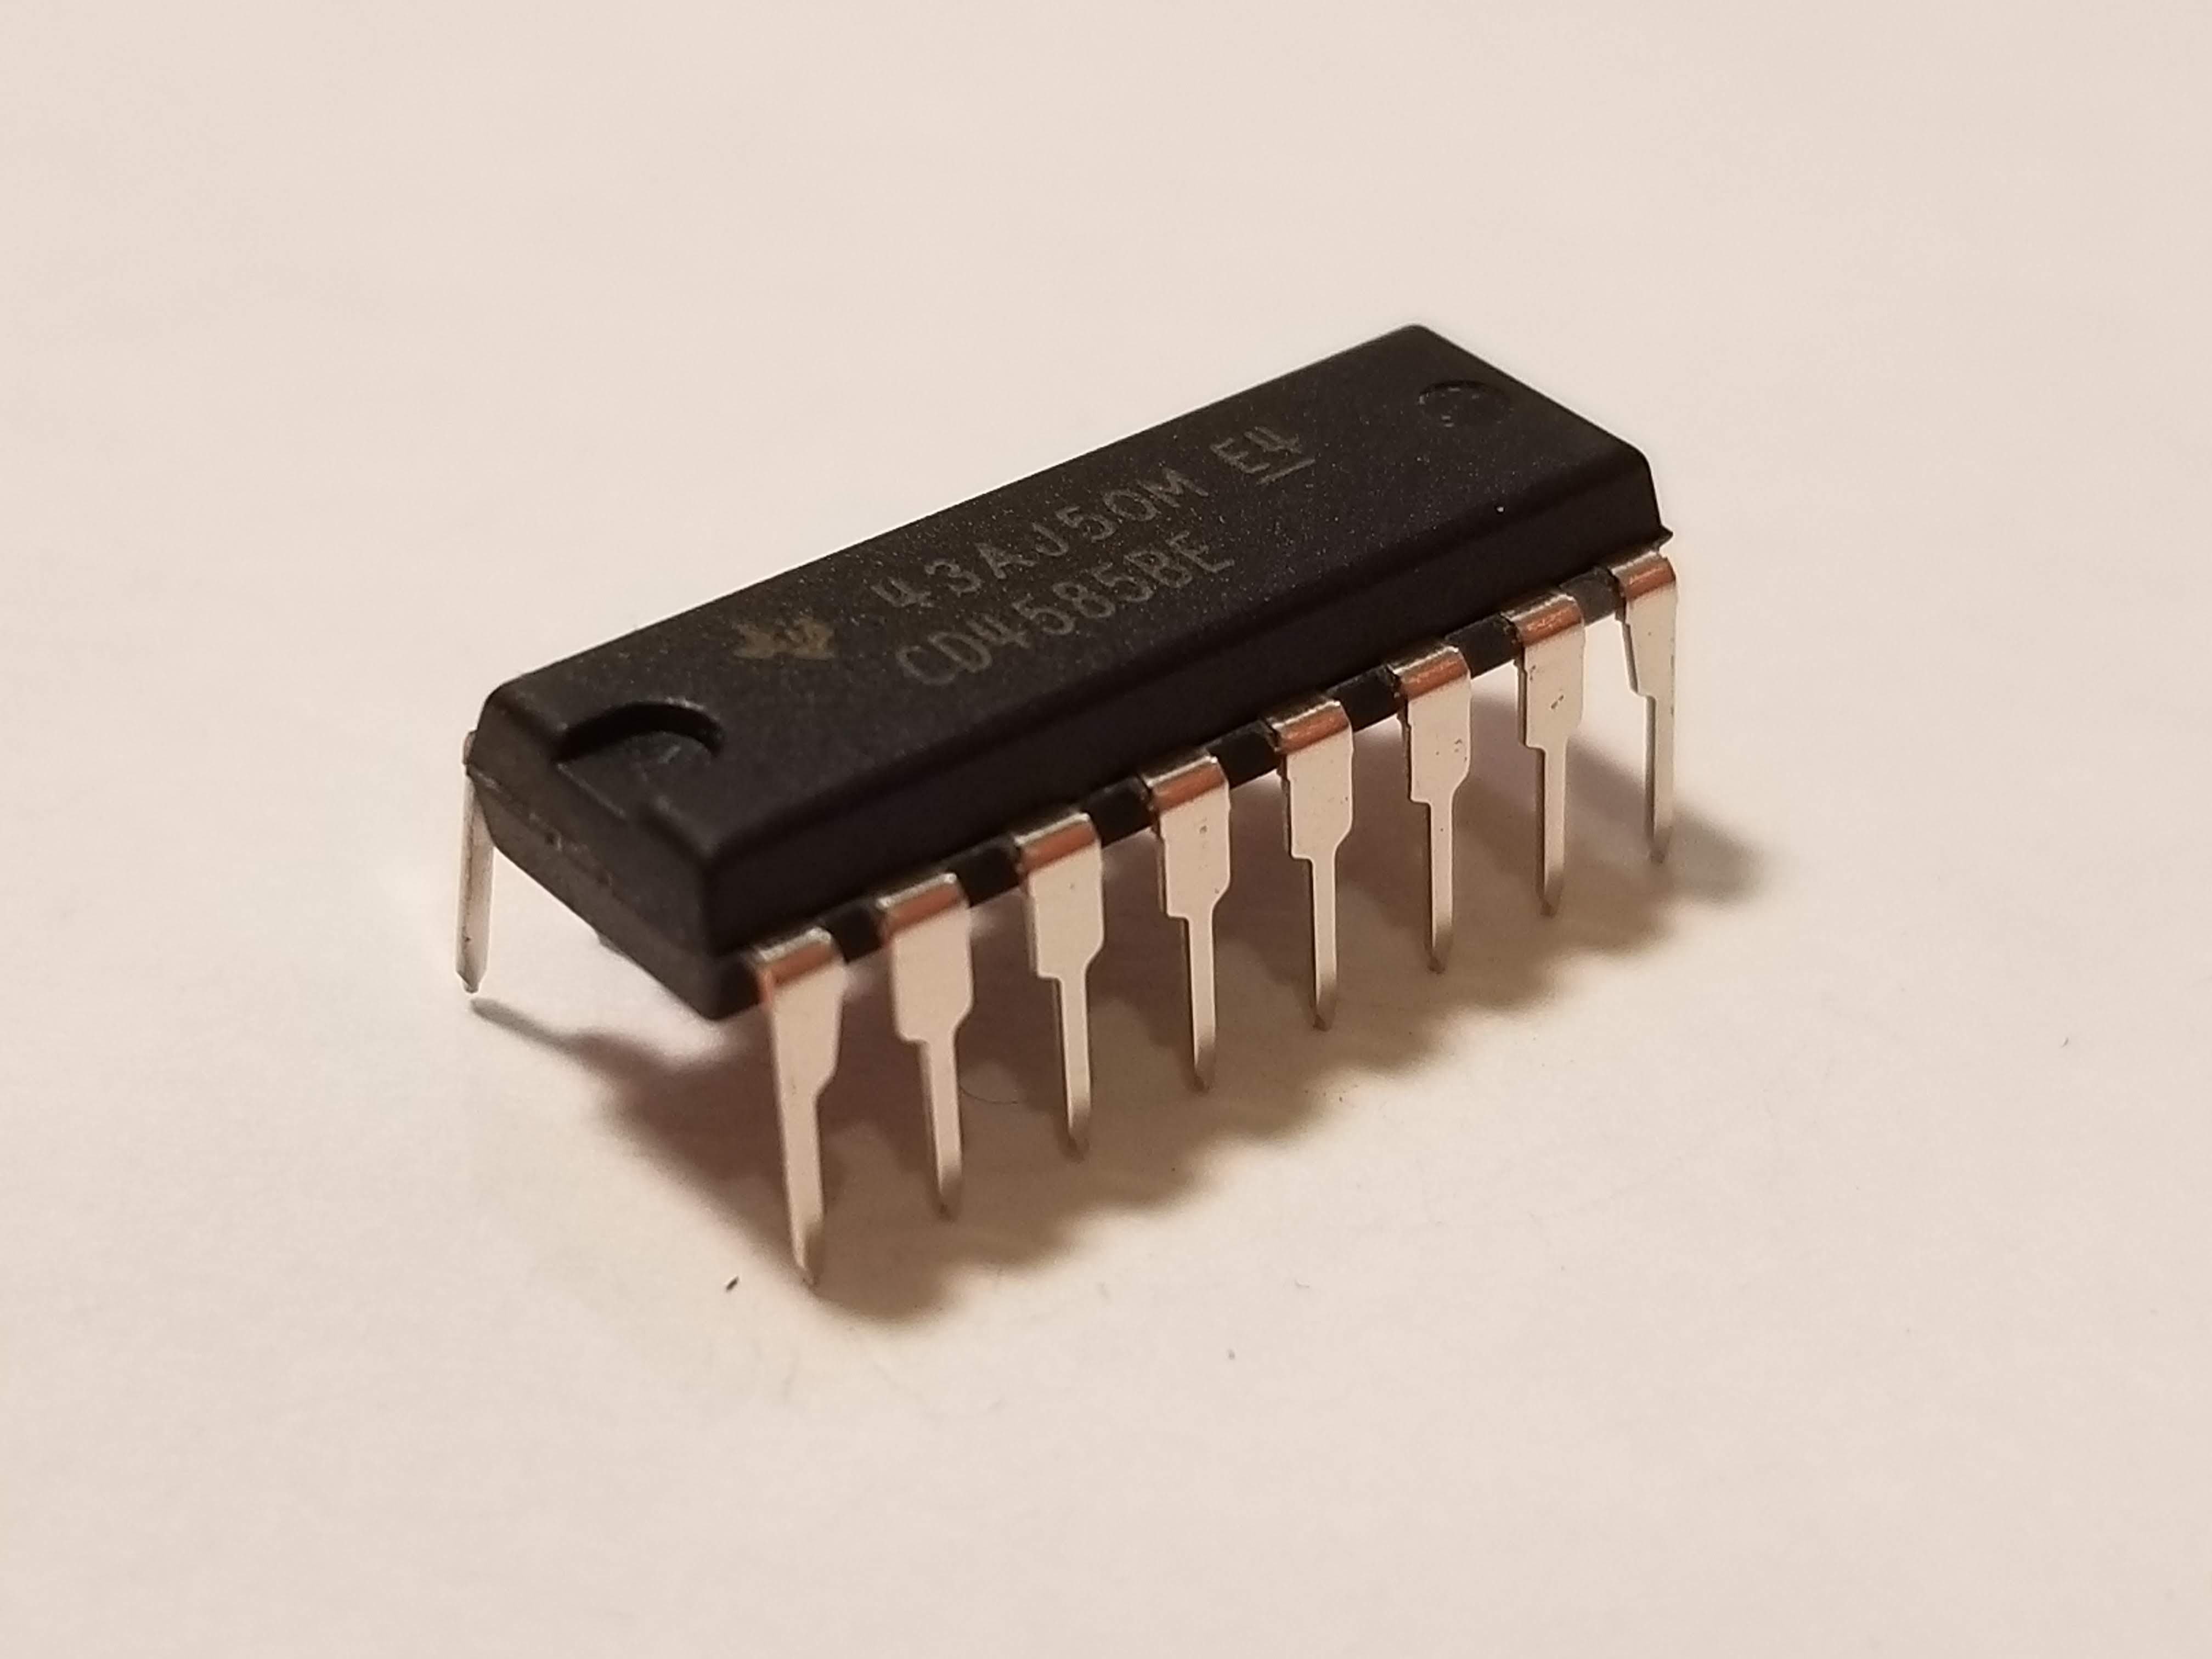 Picture of 4585 4-bit comparator